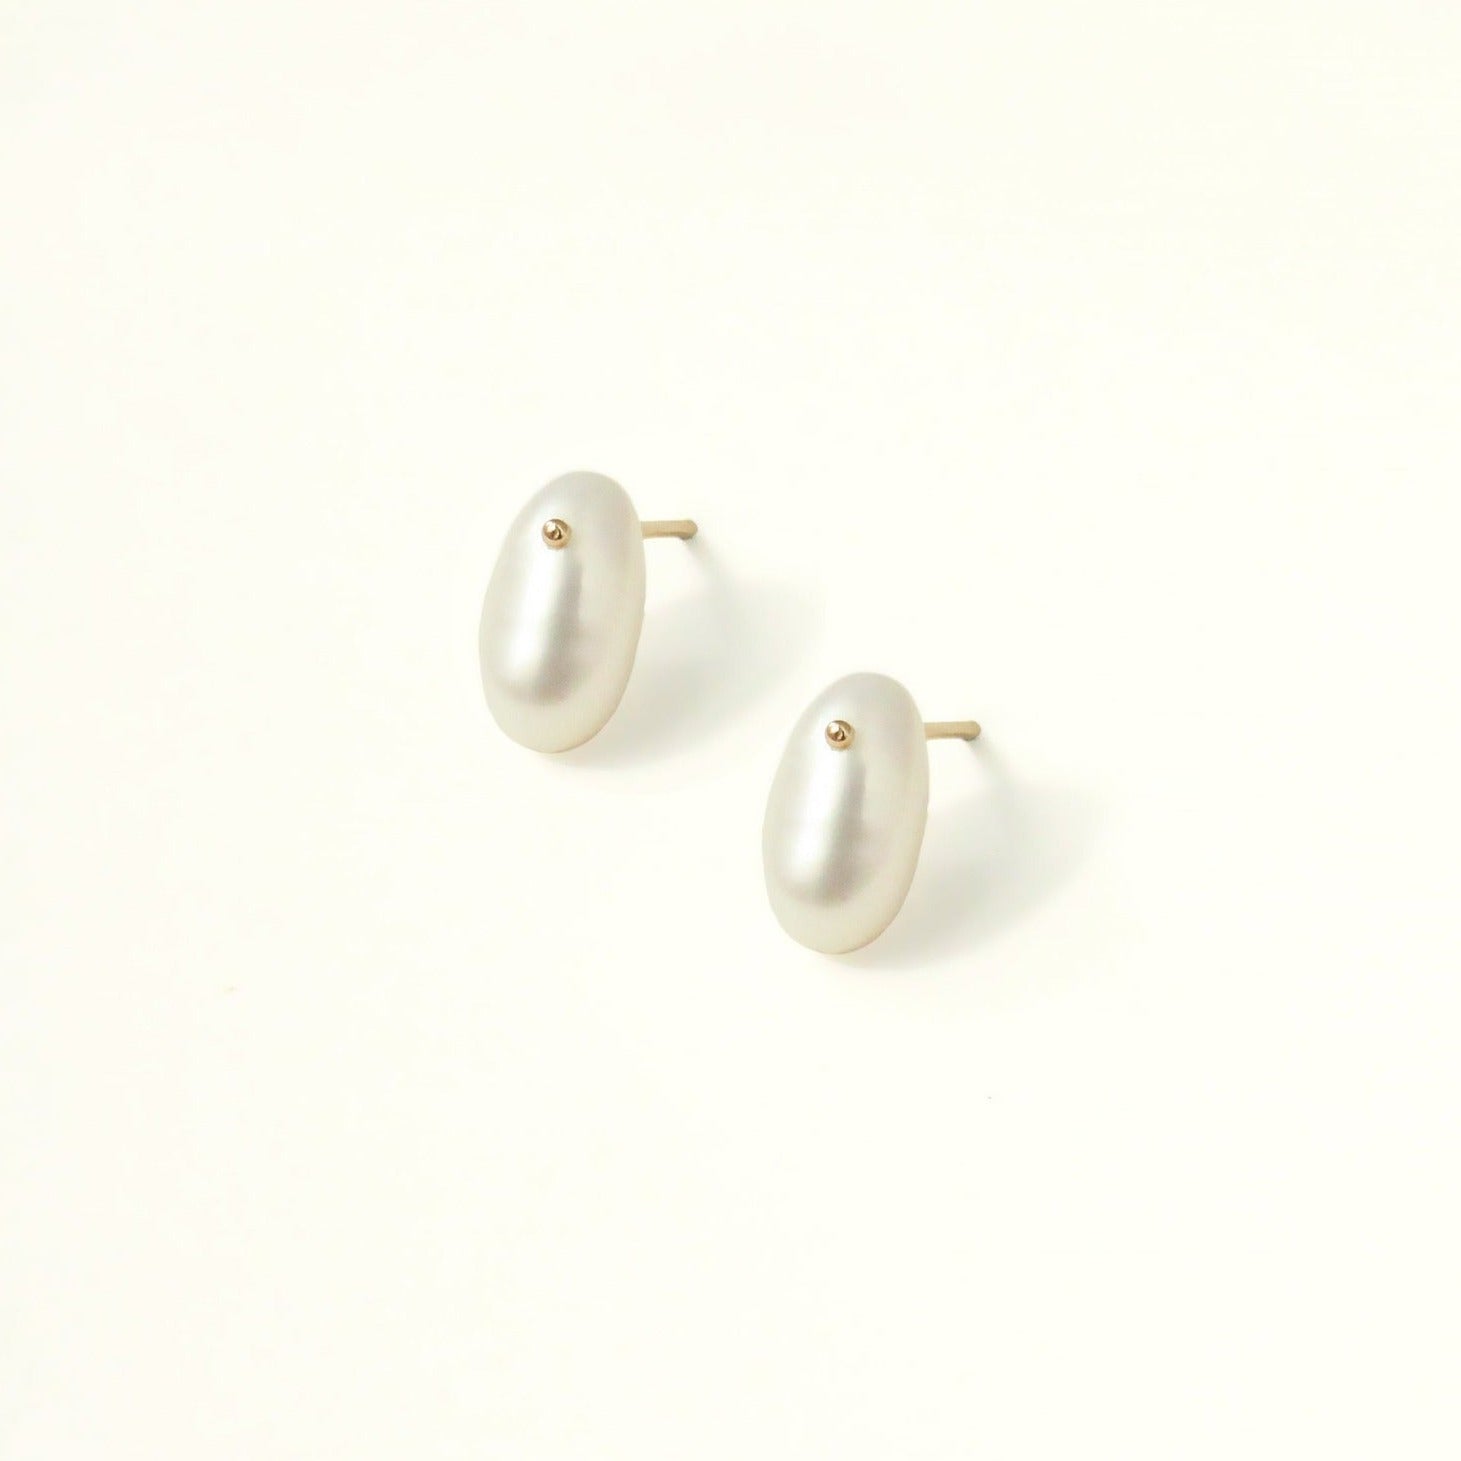 A minimalist pearl earring. The oval pearl has a small gold dot at the top, which is a sparkly unique feature. The studs are sophisticated with their simple and feminine shape.